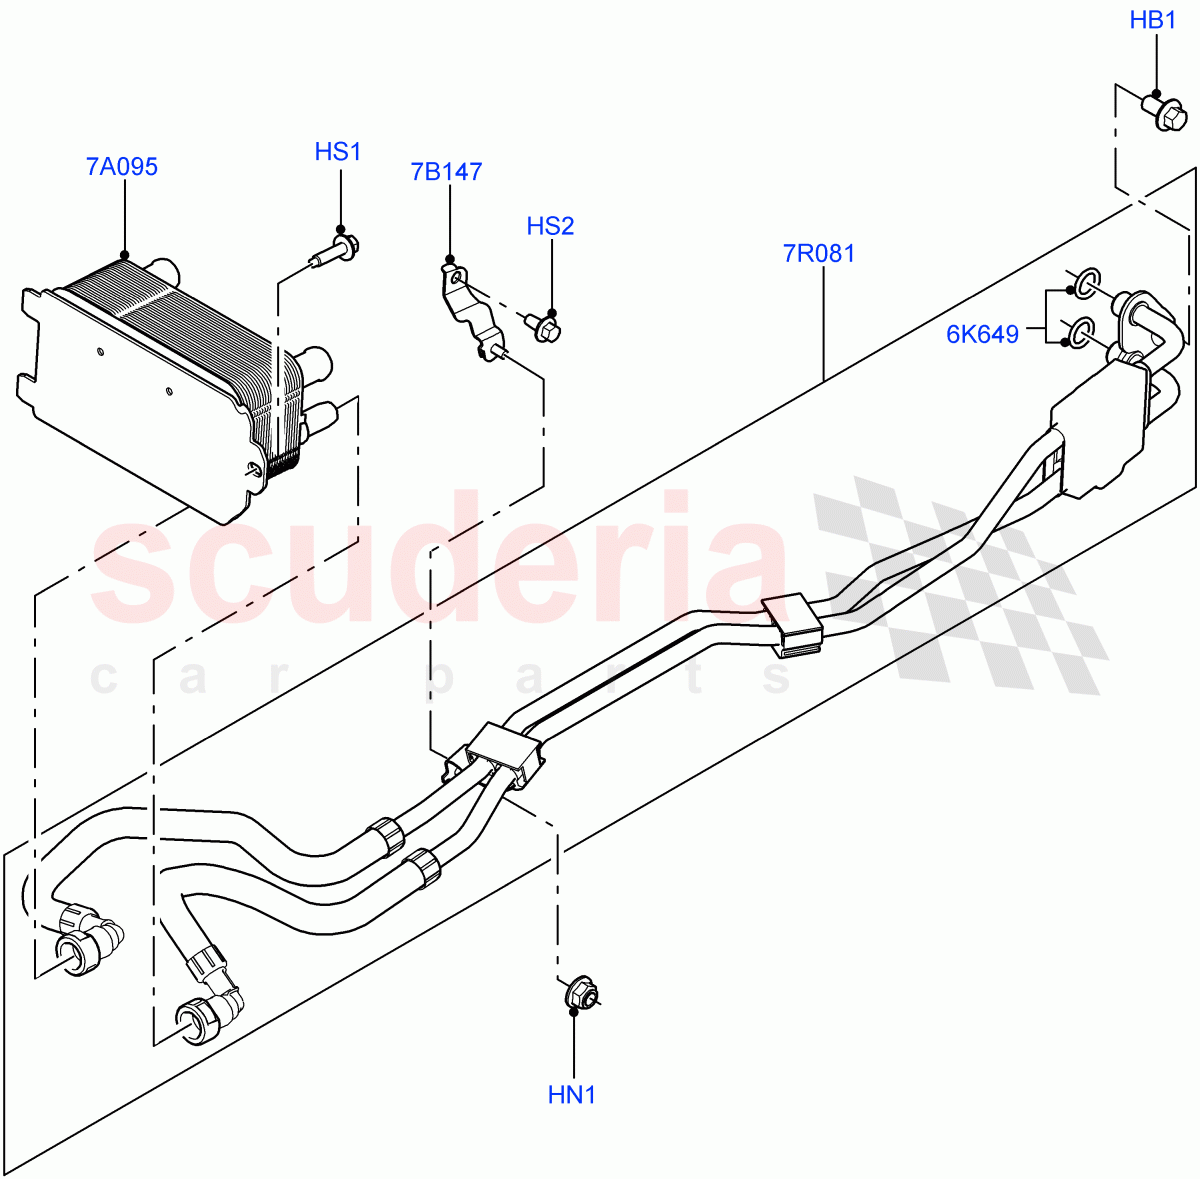 Transmission Cooling Systems(4.4L DOHC DITC V8 Diesel,8 Speed Auto Trans ZF 8HP76)((V)FROMKA000001) of Land Rover Land Rover Range Rover Sport (2014+) [2.0 Turbo Petrol GTDI]